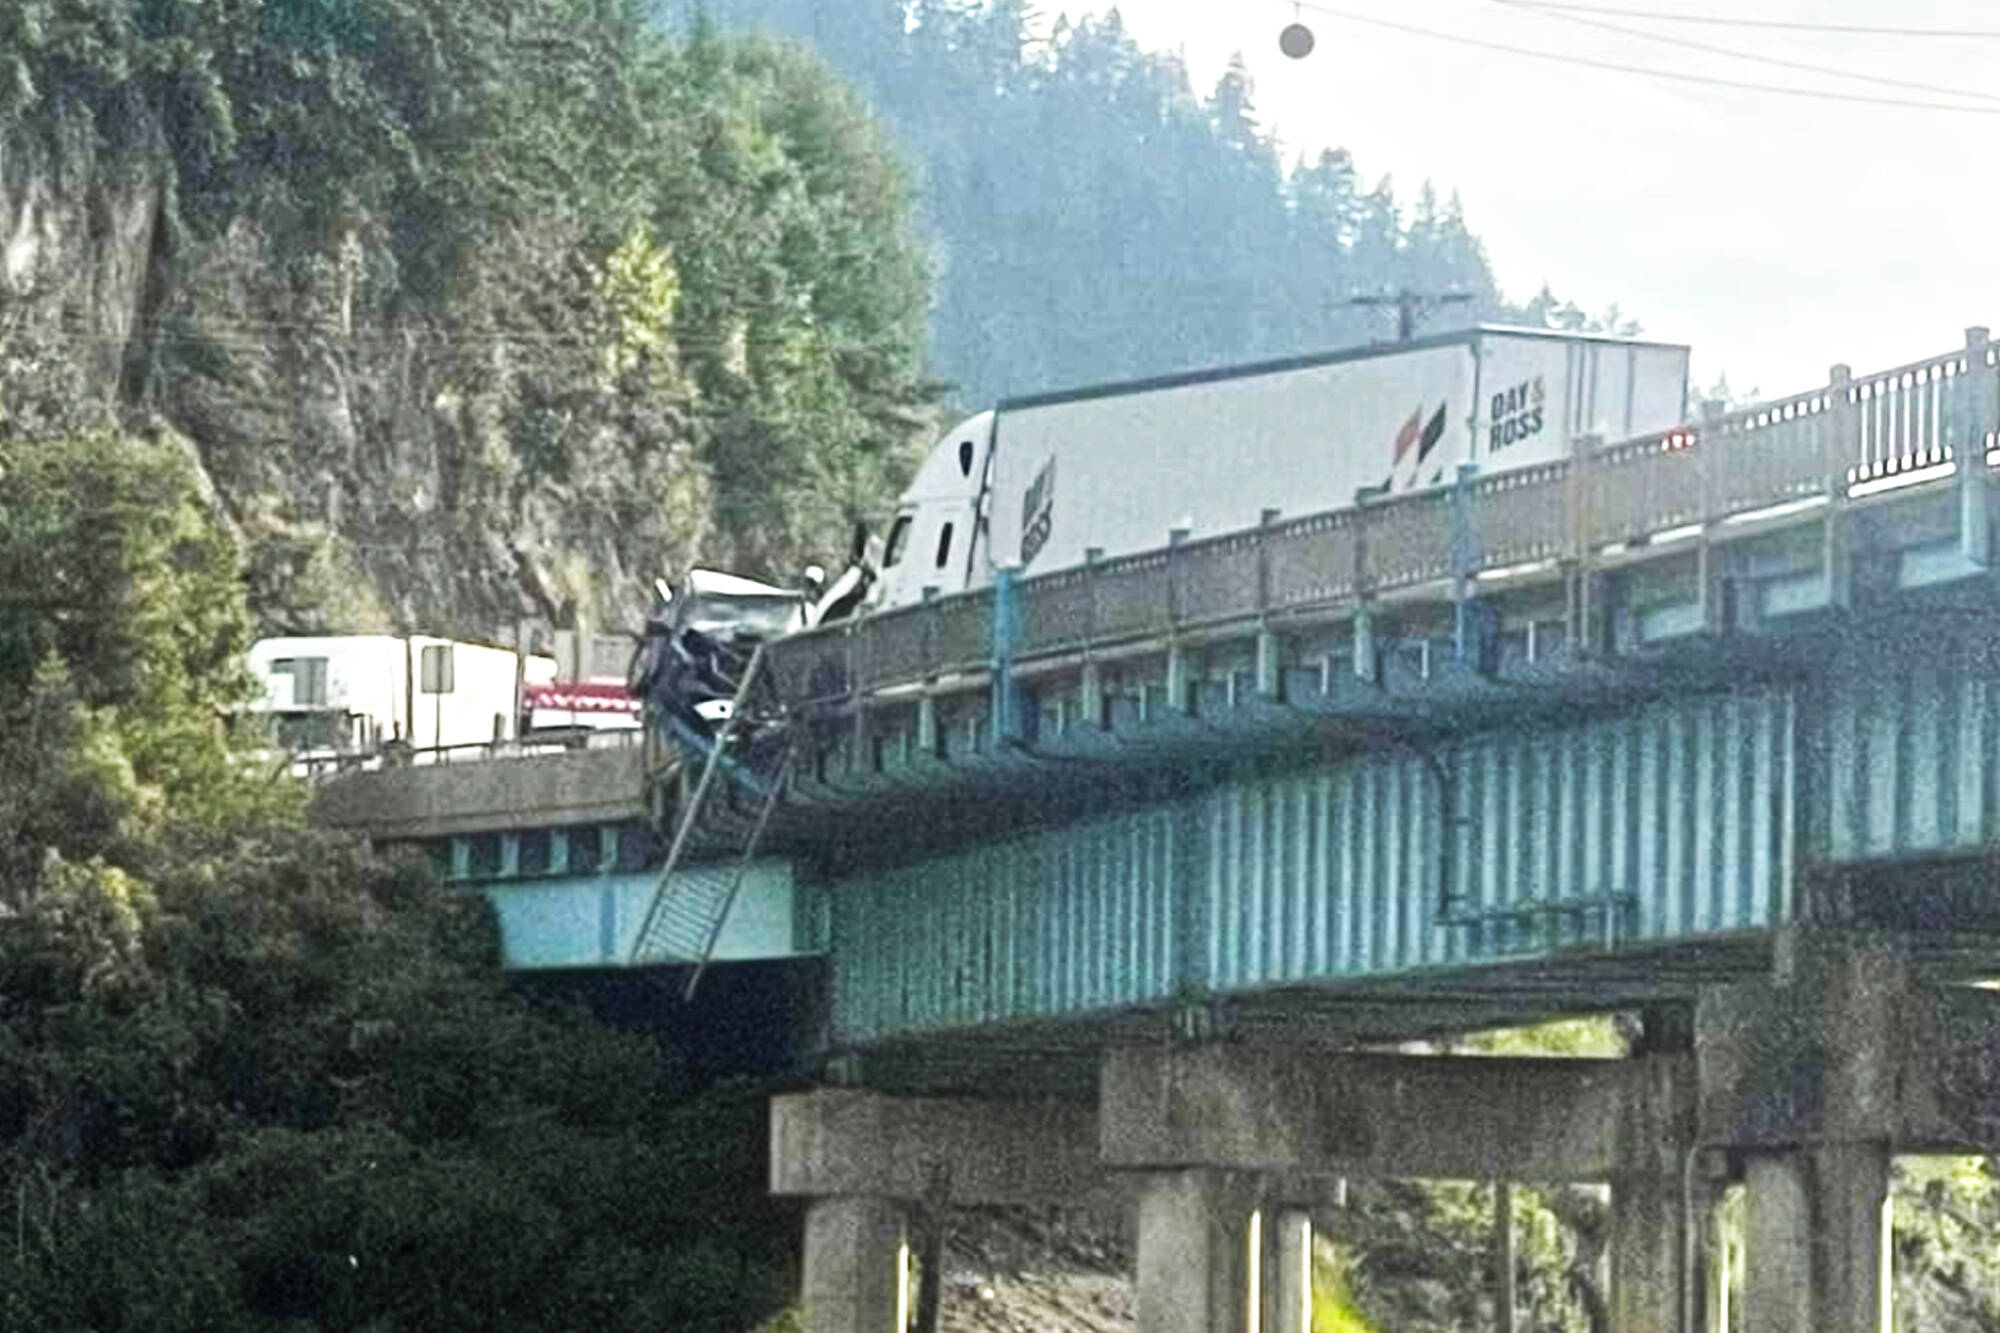 Highway 1 was closed in both directions following a multiple-vehicle collision on the Bruhn Bridge at Sicamous on Thursday evening, July 28, 2022. (Contributed)